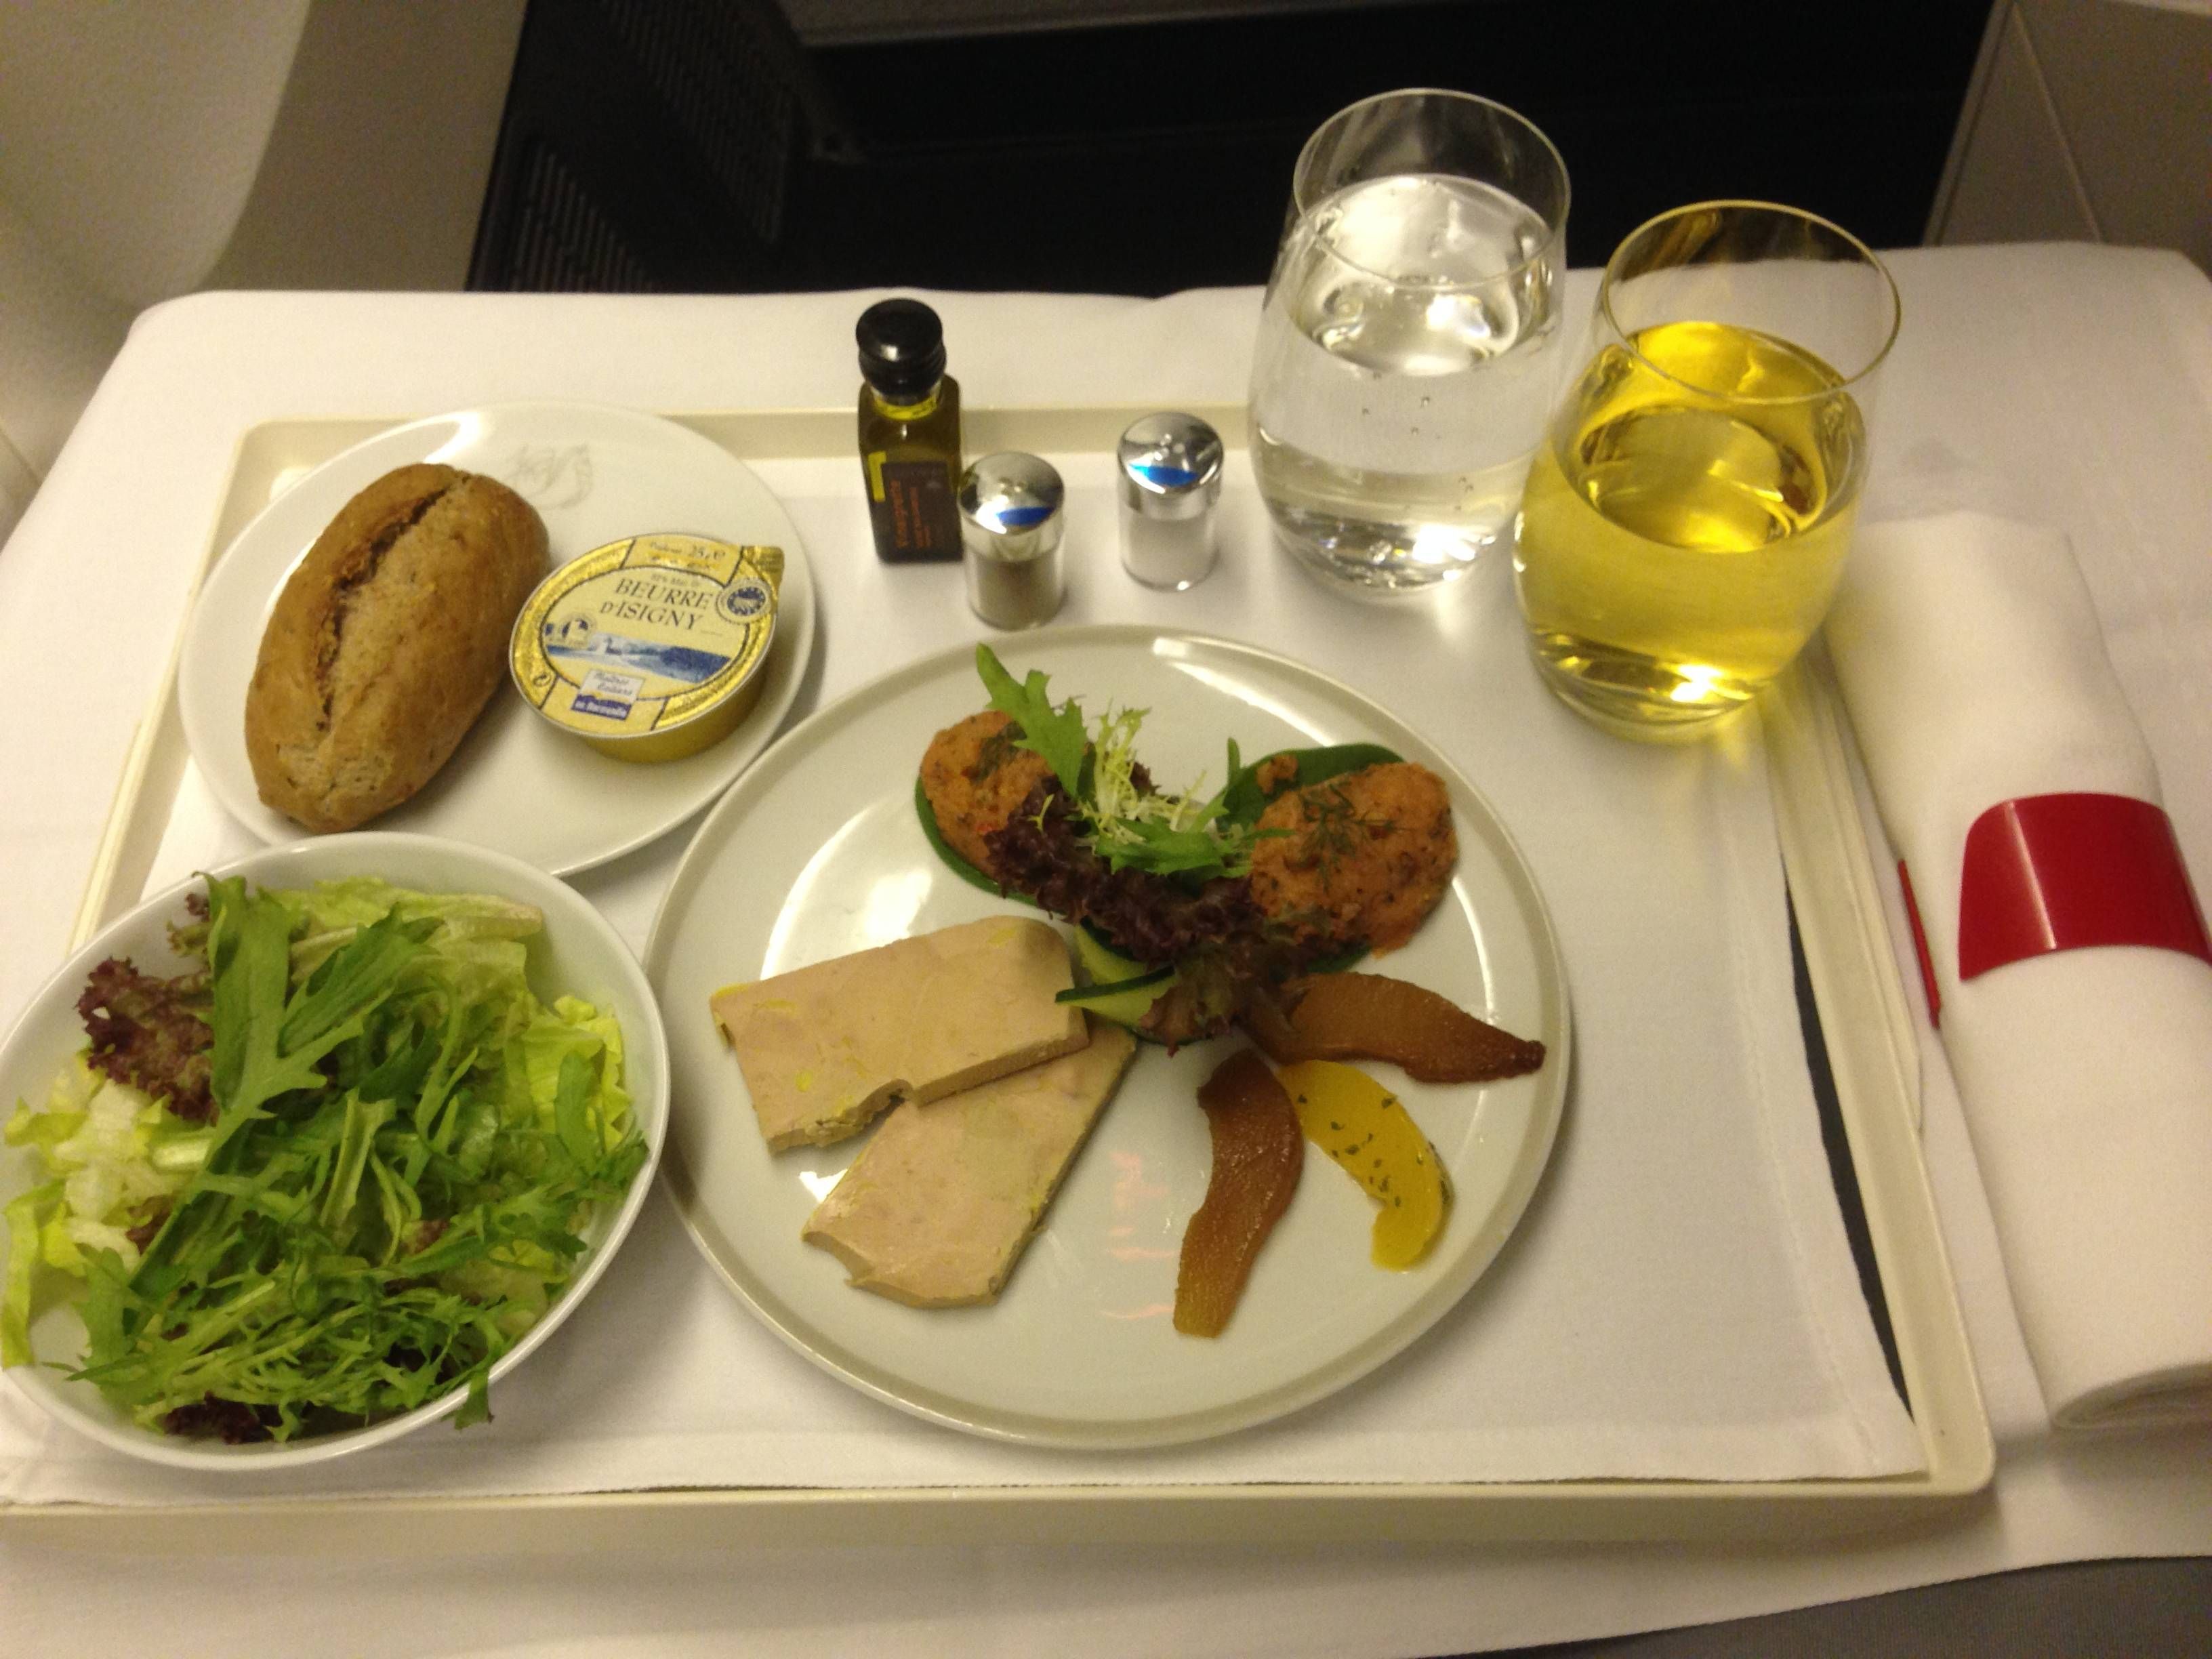 Classe Executiva Air France Boeing 777-300ER Affaires Business Class